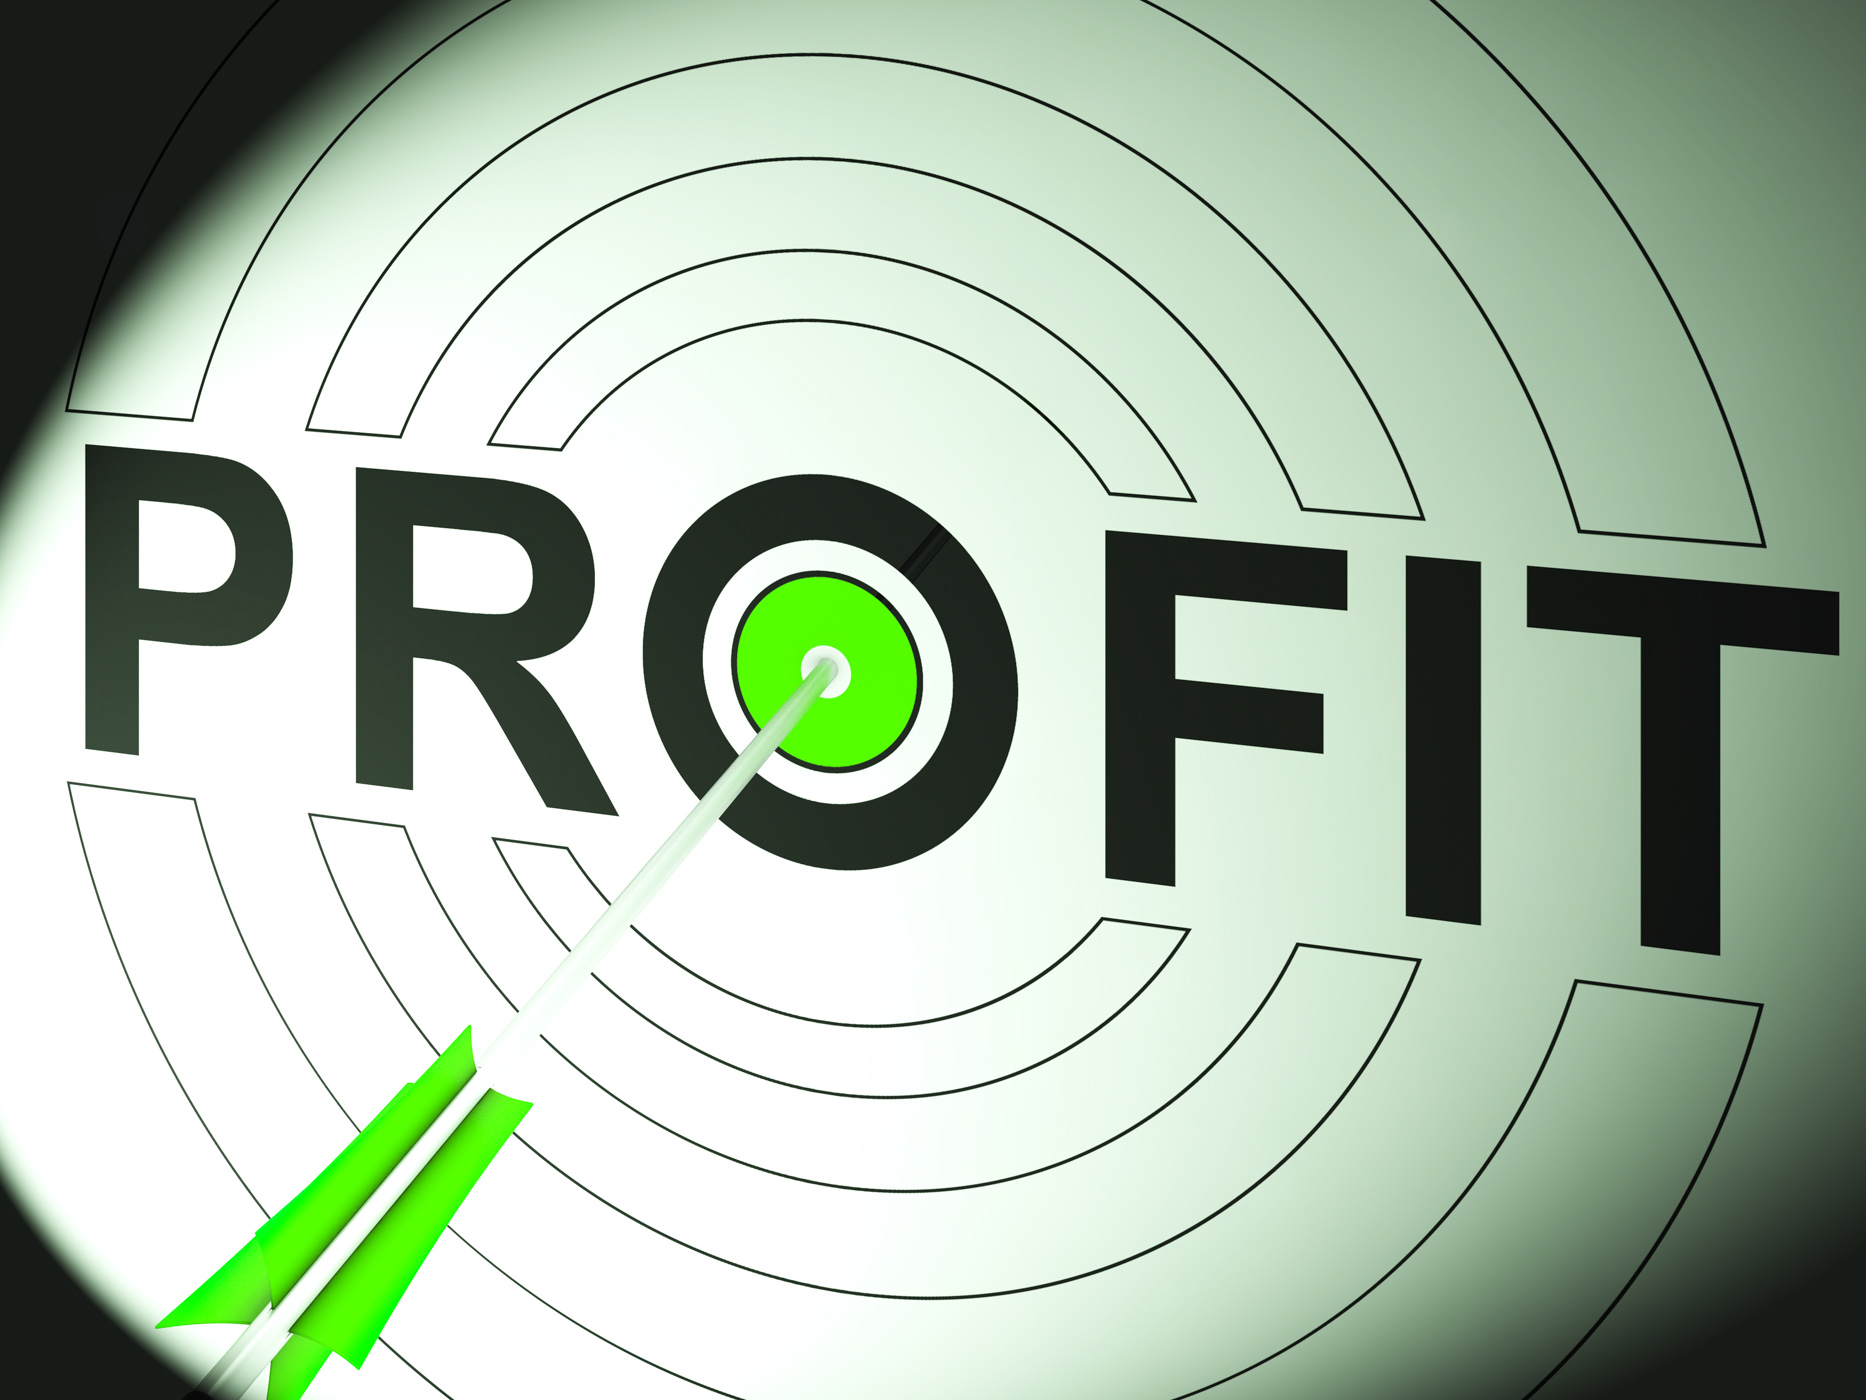 Profit shows business success in trading photo